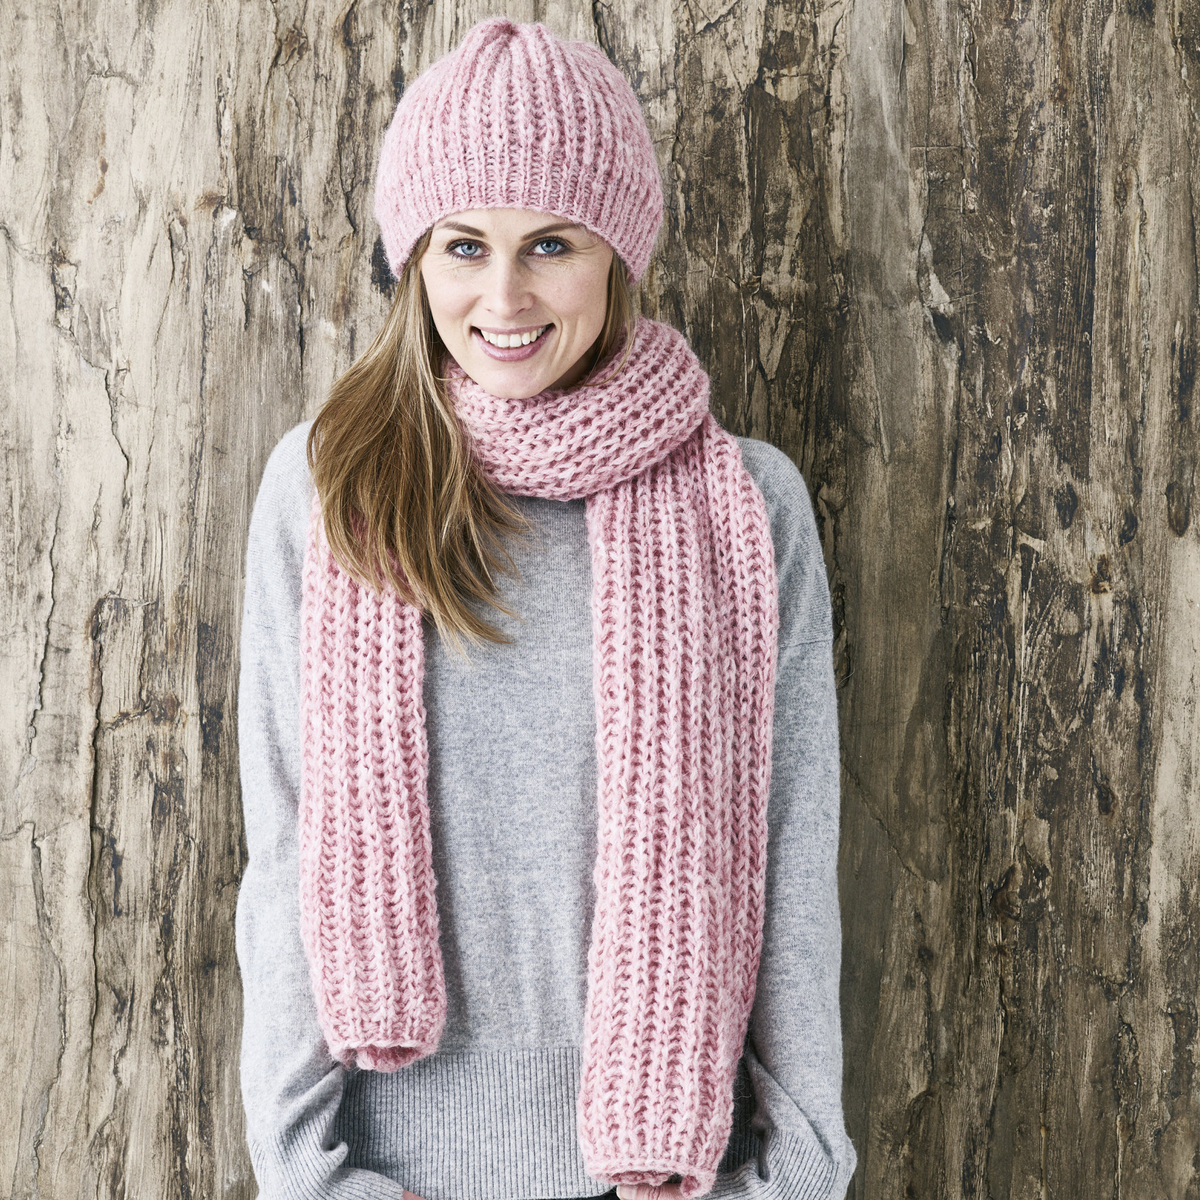 Knit a hat and scarf